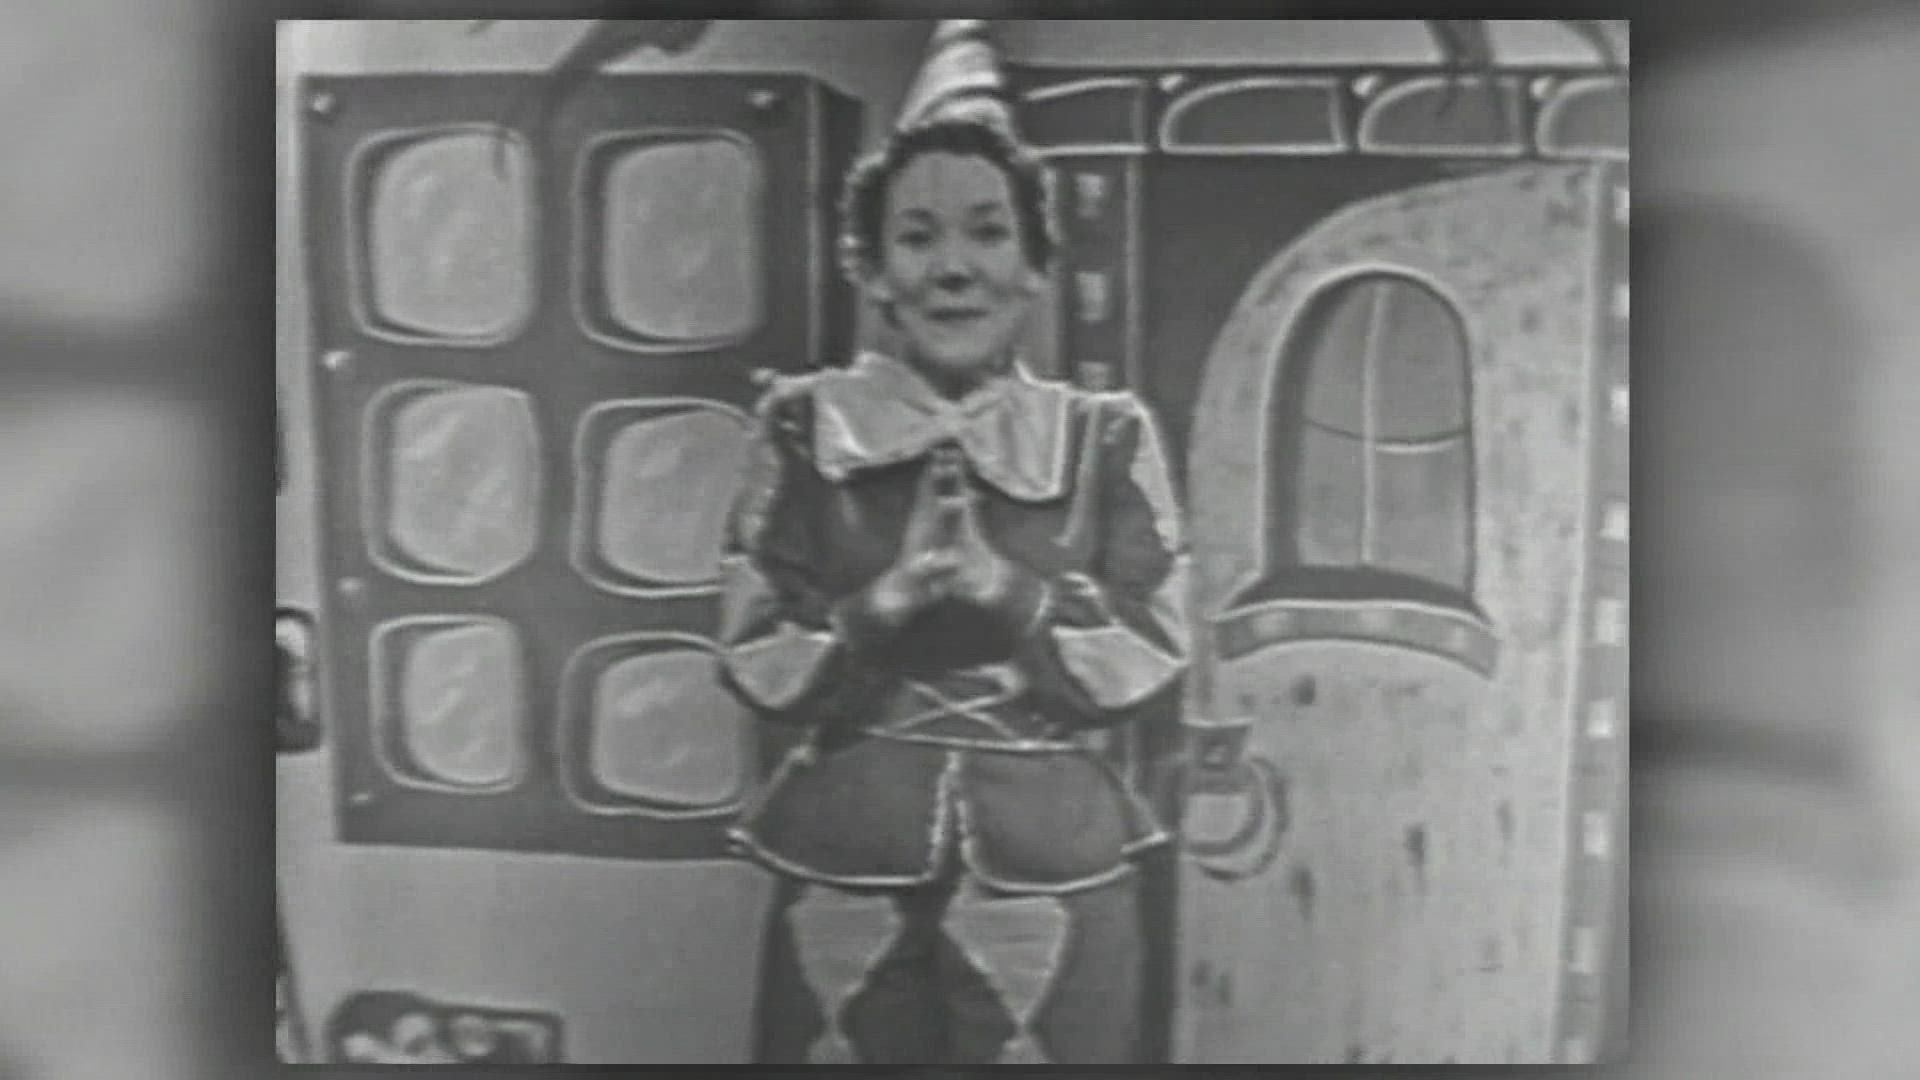 Ruth Prins, otherwise known as beloved childrens' TV host Wunda Wunda, died in Seattle at the age of 101, her daughter Debrah Prins confirmed.